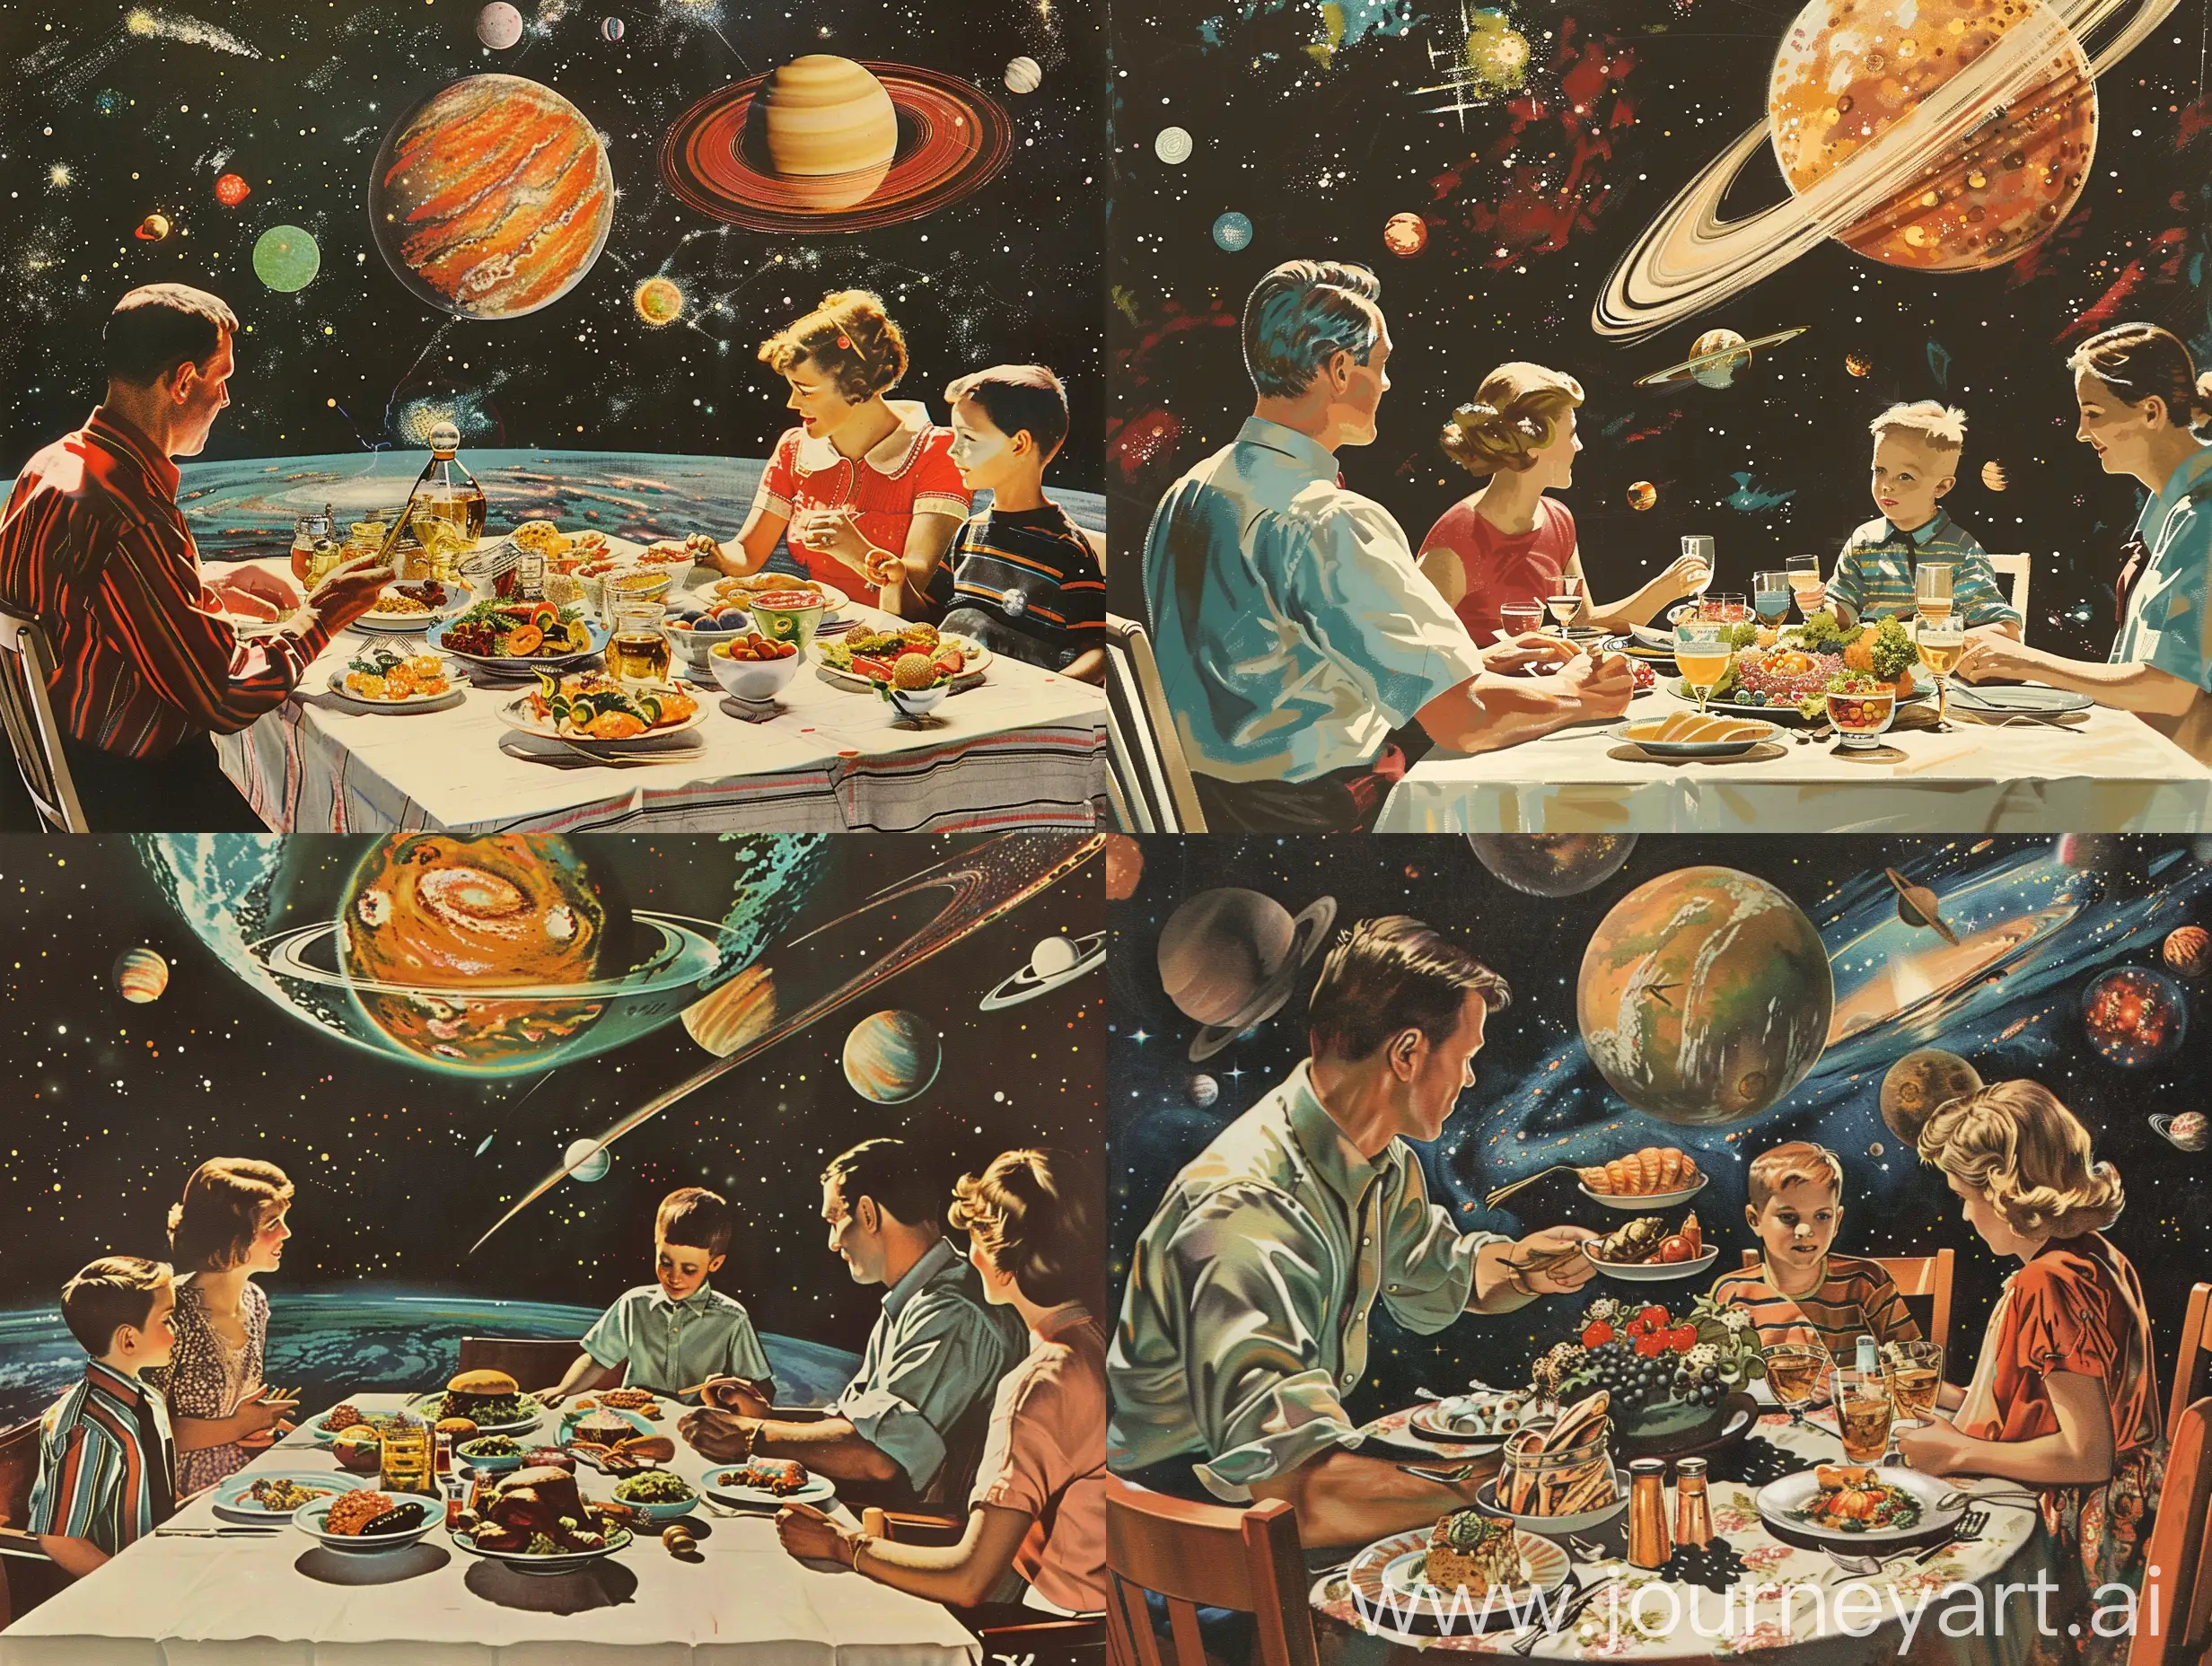 A family seated at dinner, about to enjoy a variety of unusual foods from distant galaxies. In the style of Norman Rockwell.